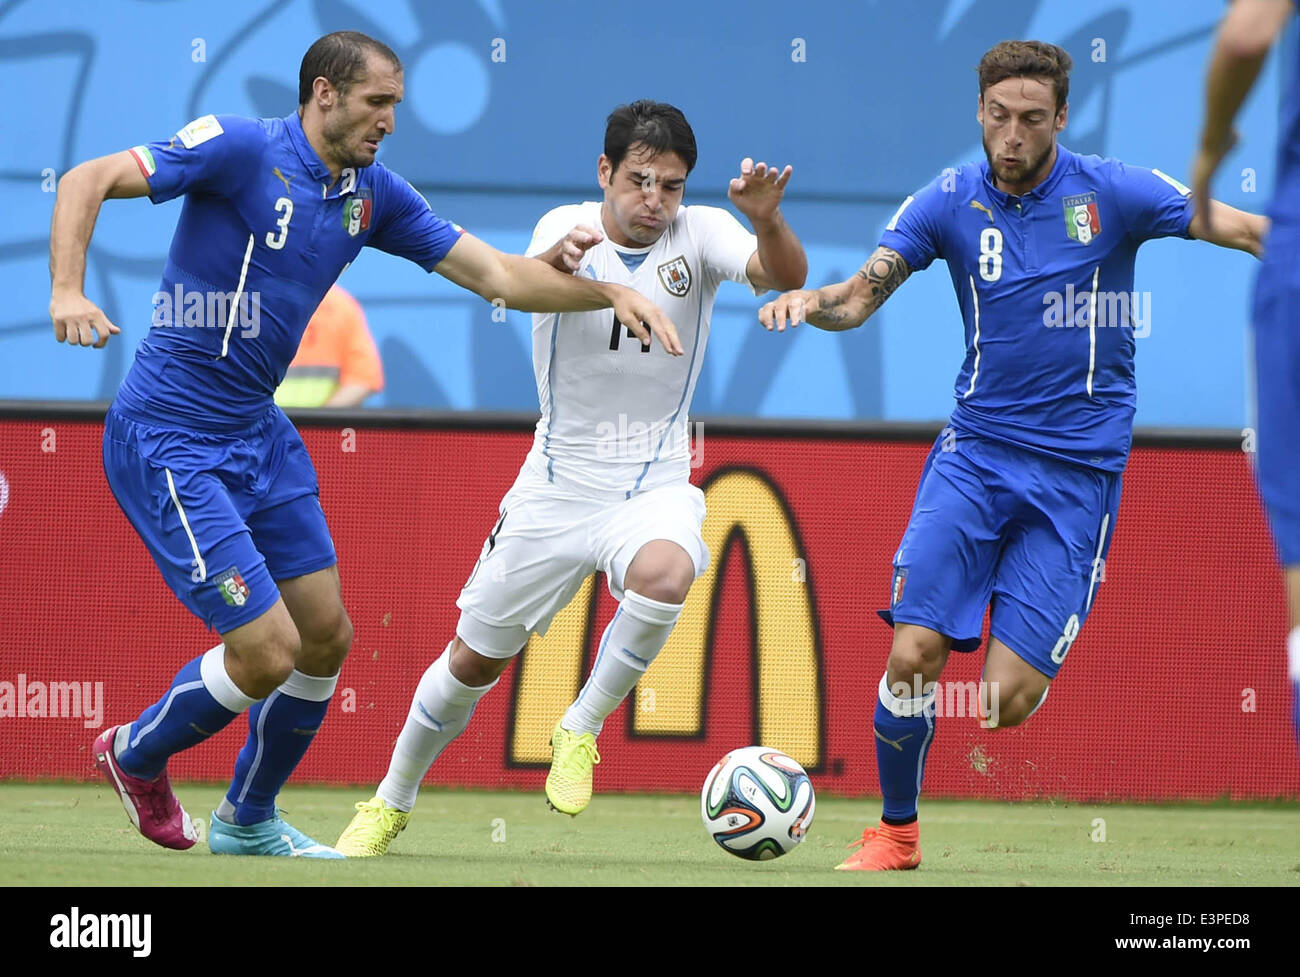 Natal, Brazil. 24th June, 2014. Uruguay's Nicolas Lodeiro (C) vies for the ball during a Group D match between Italy and Uruguay of 2014 FIFA World Cup at the Estadio das Dunas Stadium in Natal, Brazil, June 24, 2014. © Guo Yong/Xinhua/Alamy Live News Stock Photo